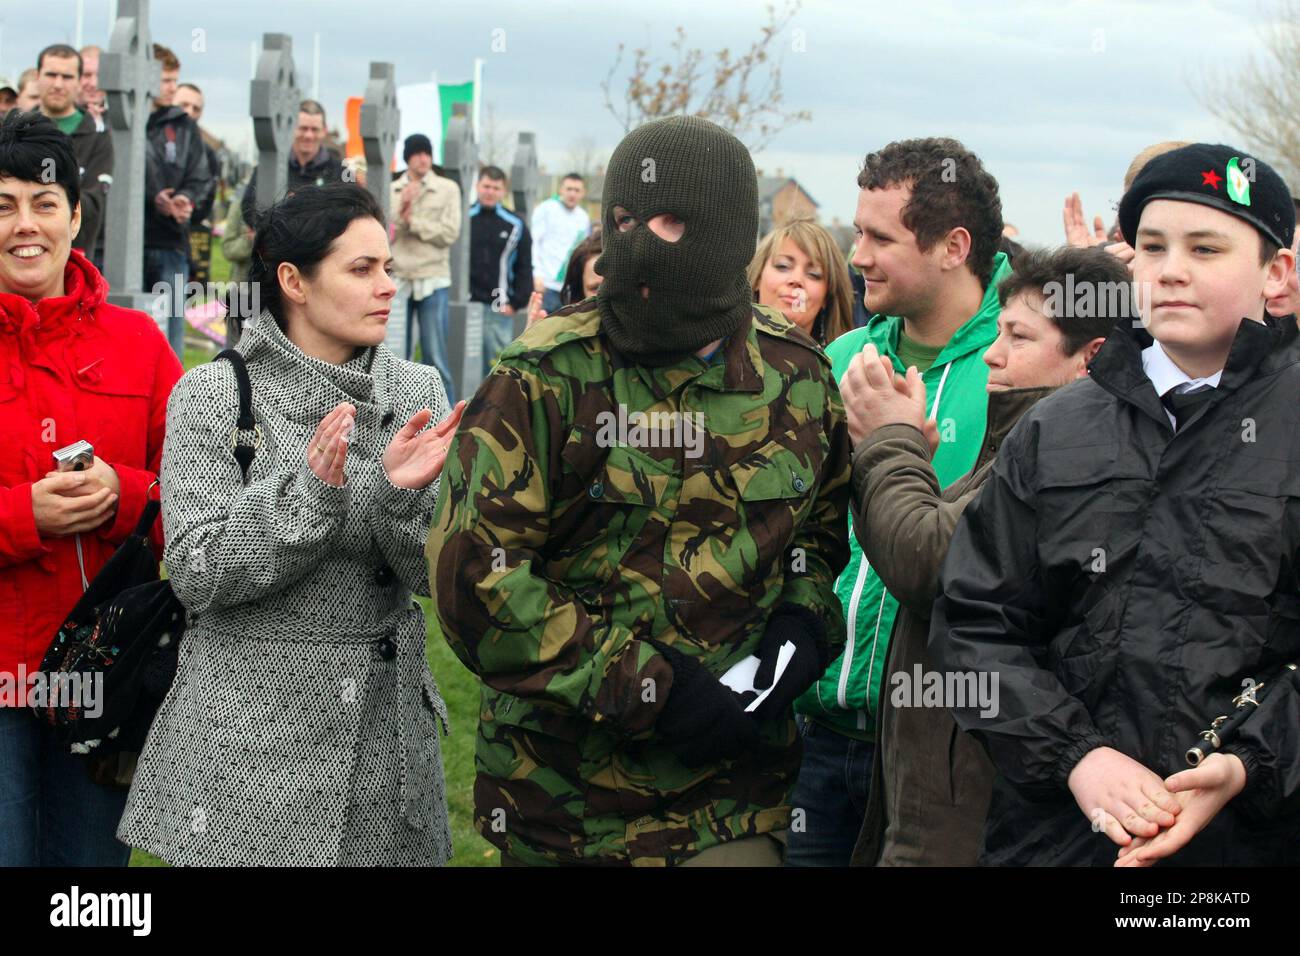 A Member Of The Real Irish Republican Army Rira Group Appears From The Crowd To Read Out A